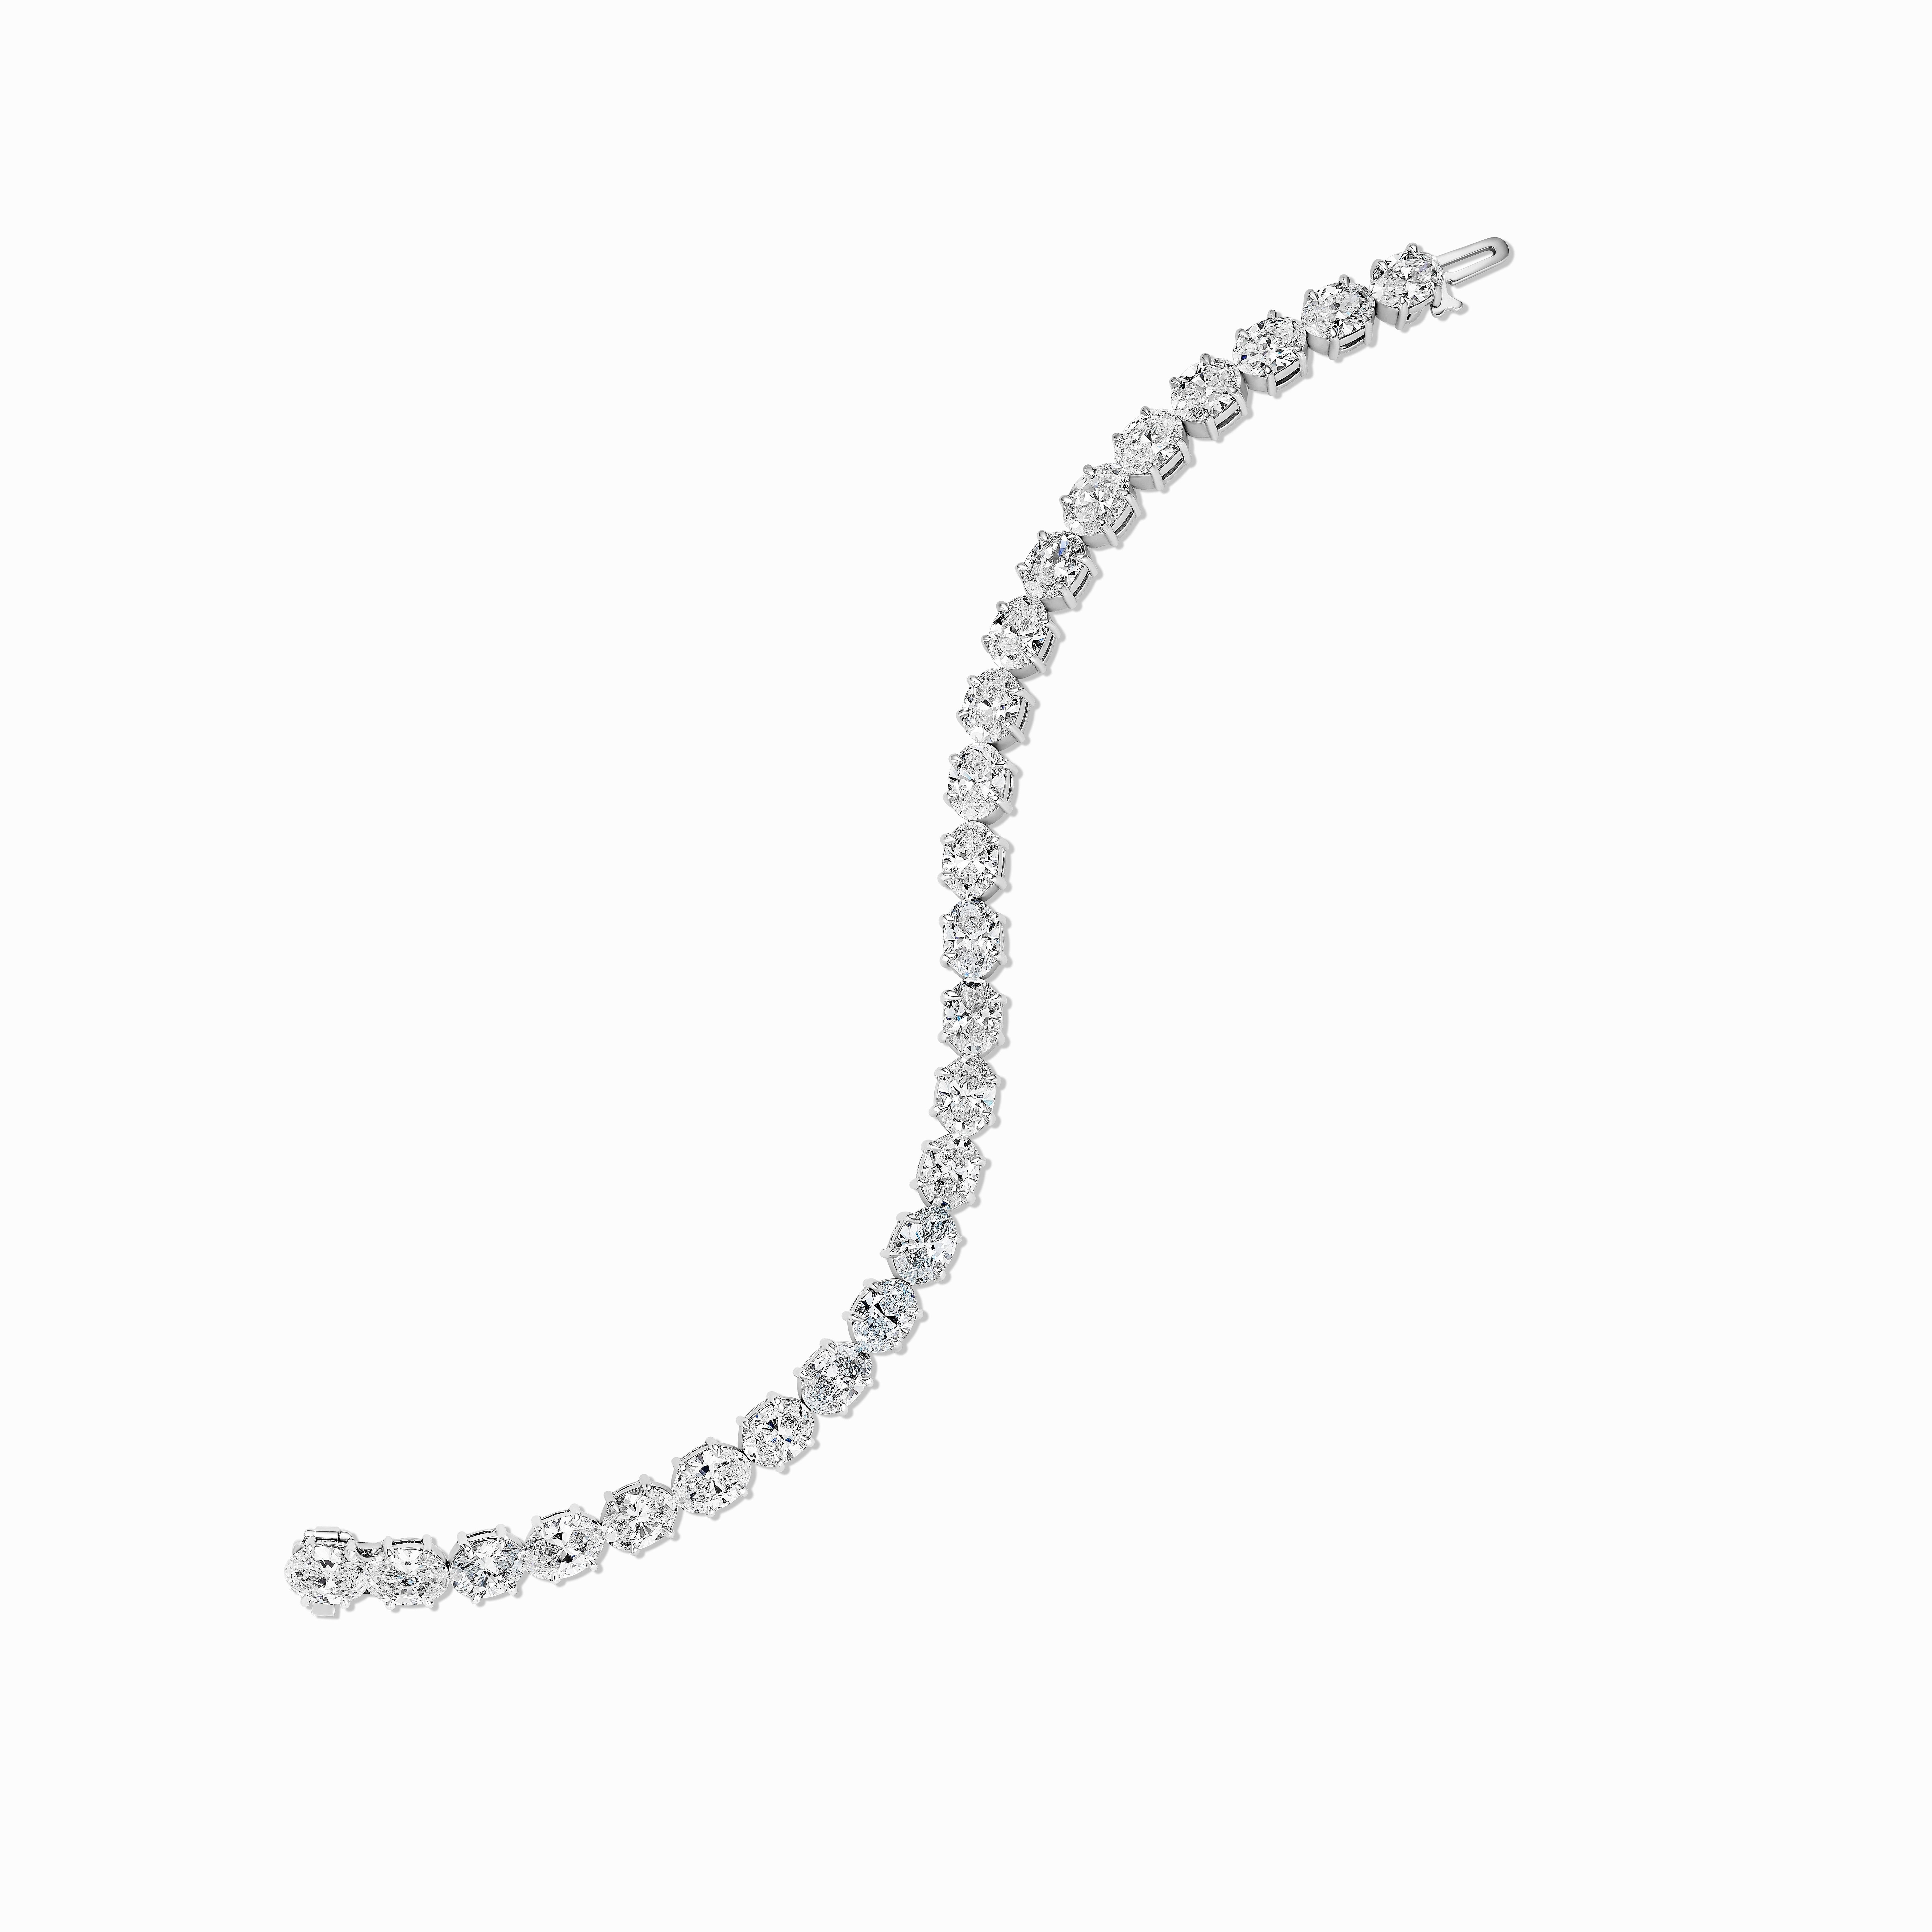 This beautiful tennis bracelet features 25 perfectly matched Oval Shaped Diamonds set at an angle for a very elegant and sophisticated look.
Stones are set East-West
Every Diamond is GIA certified as DEF color and VS-SI clarity. 
17.50 carats total.